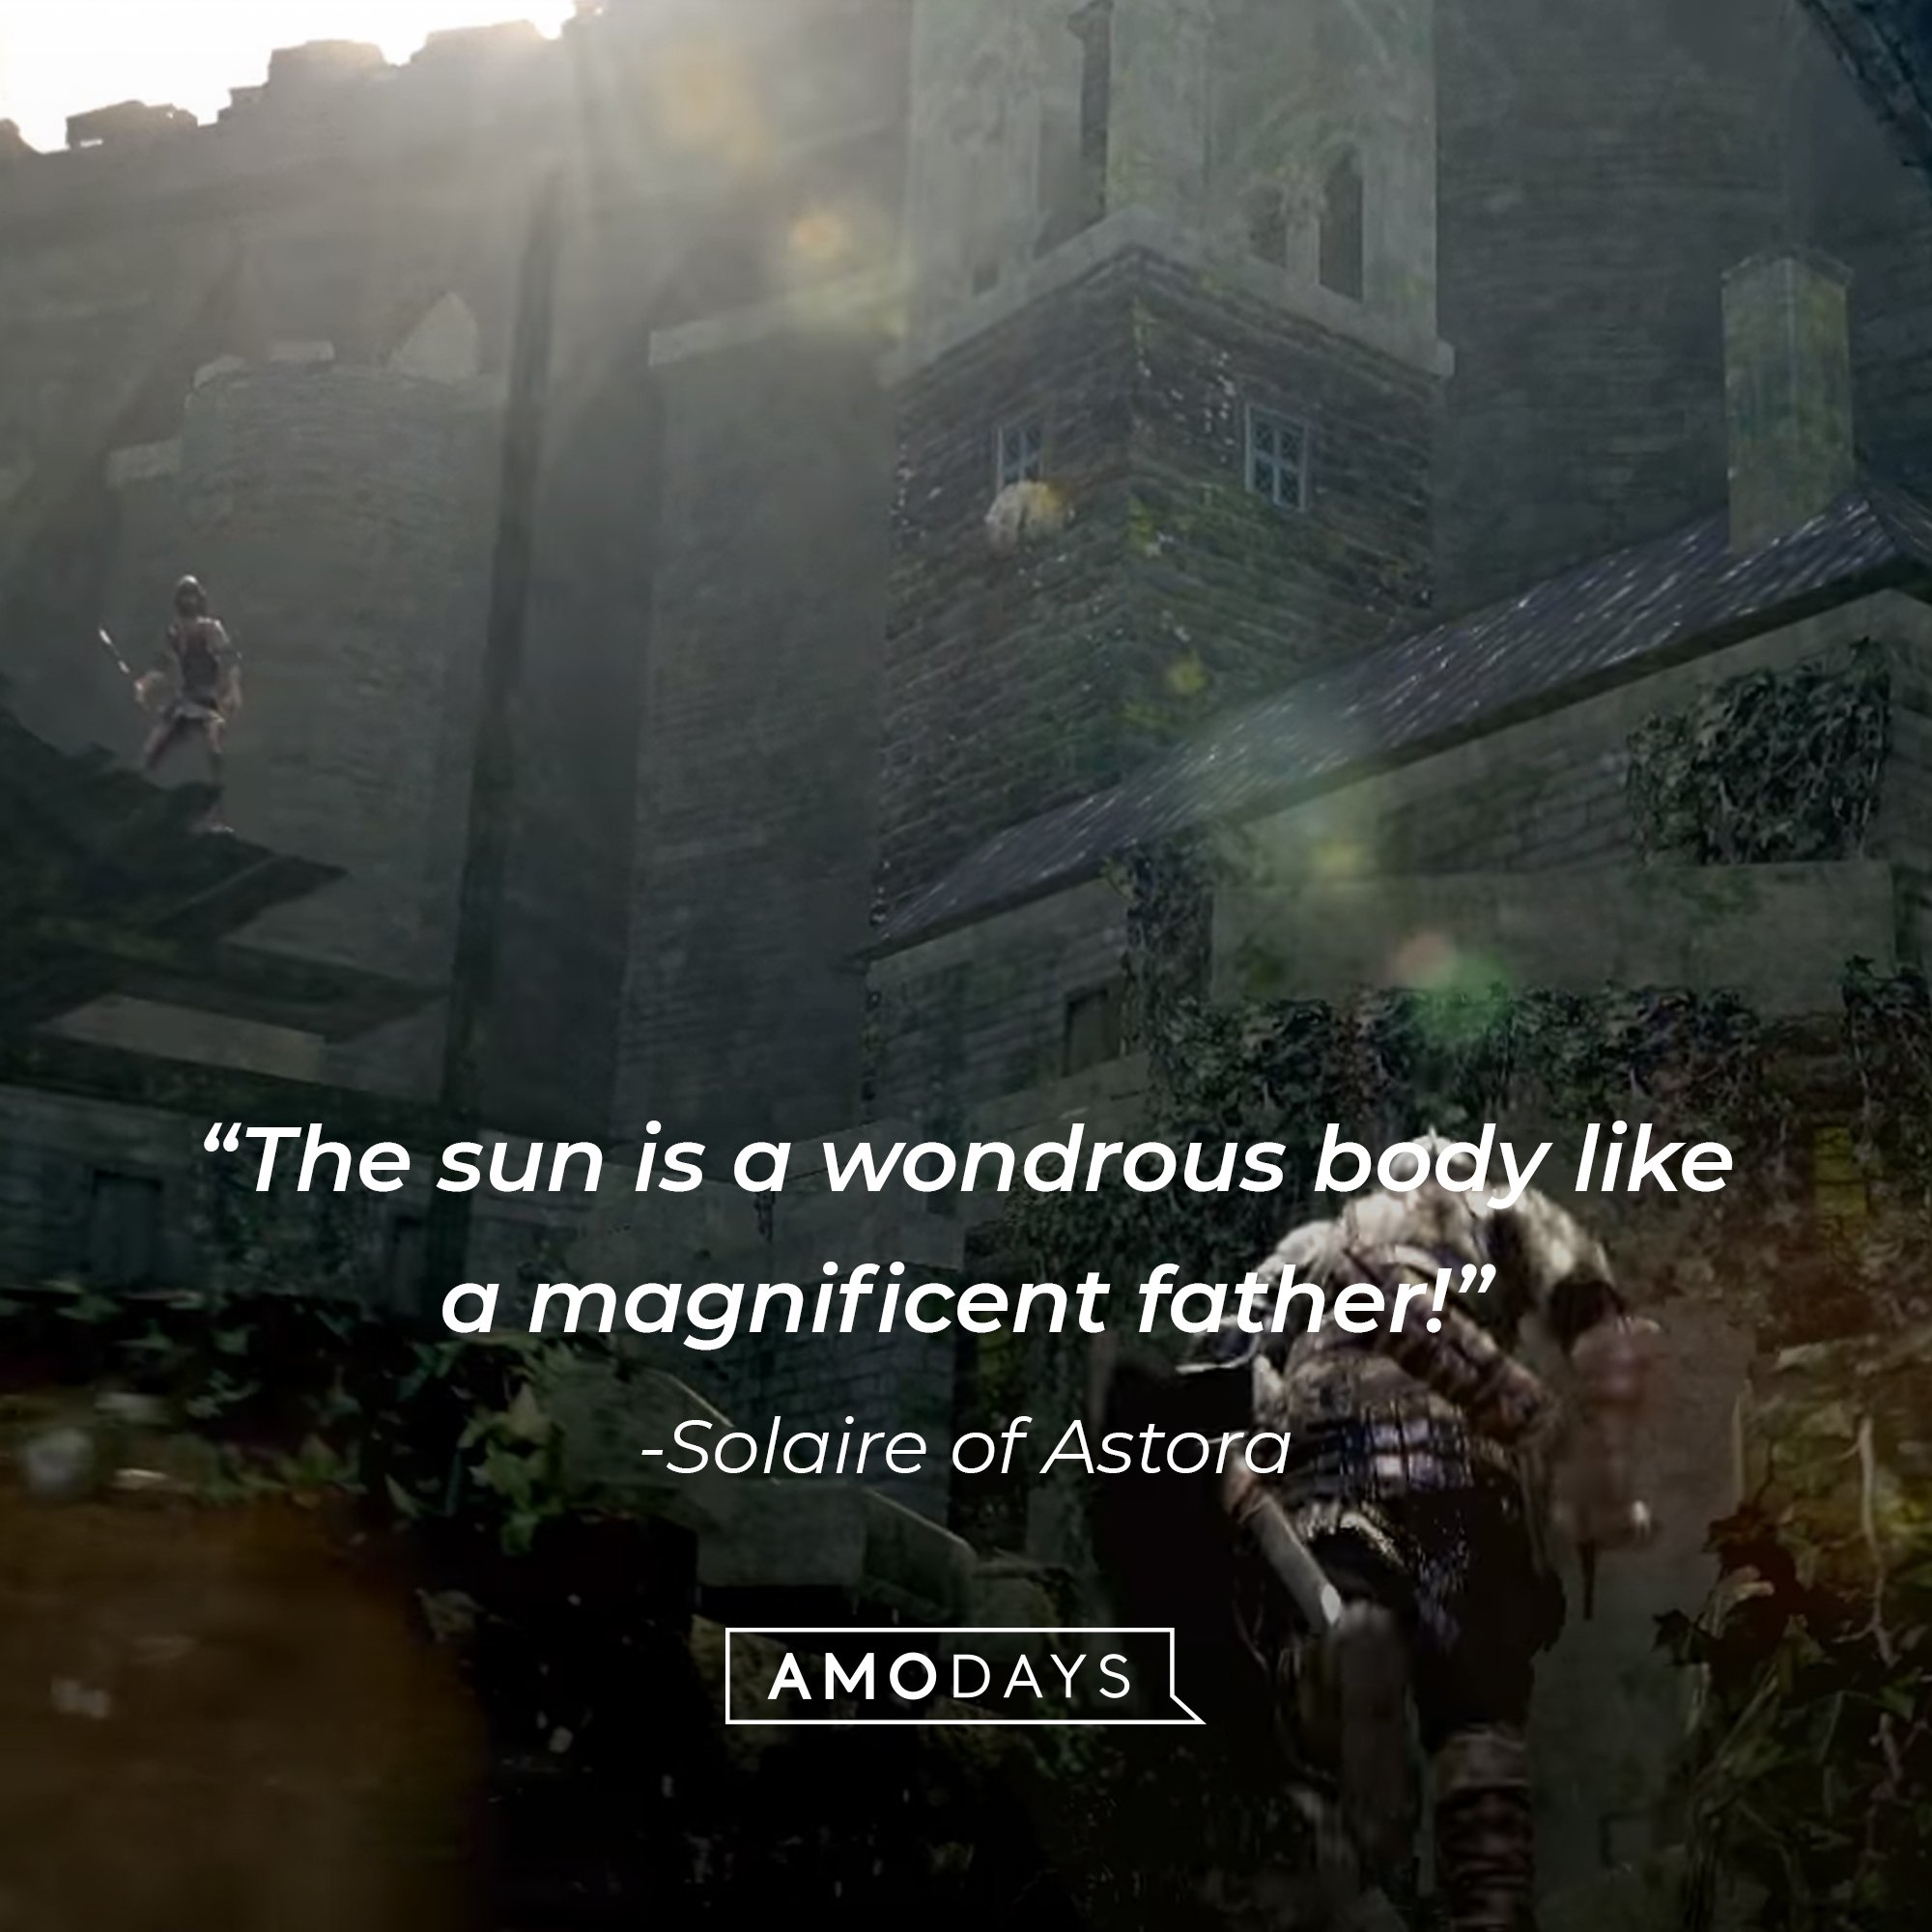  Solaire of Astora’s quote: "The sun is a wondrous body like a magnificent father!" | Image: AmoDays